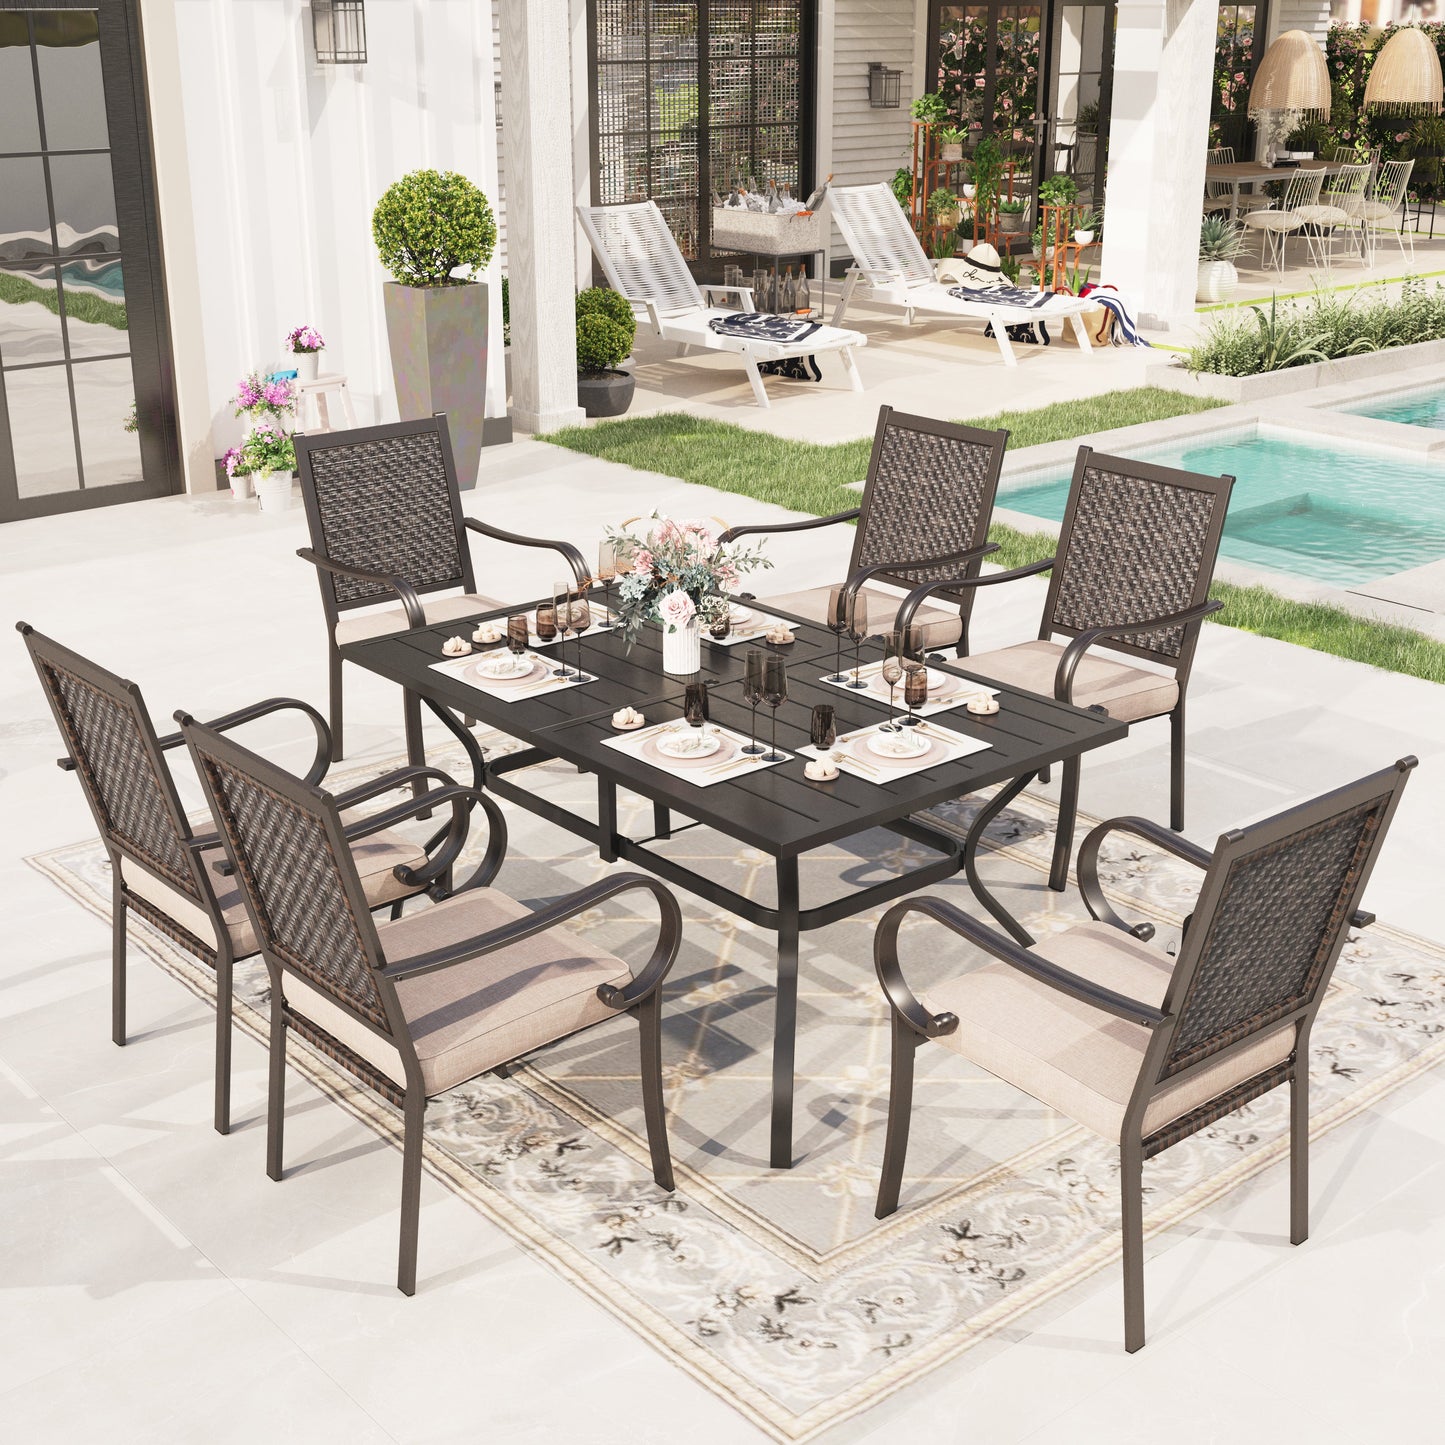 Sophia & William 7 Pieces Patio Dining Table and Chairs Set Outdoor Rattan Dining Chairs with Cushions and Rectangle Metal Table for 6 person